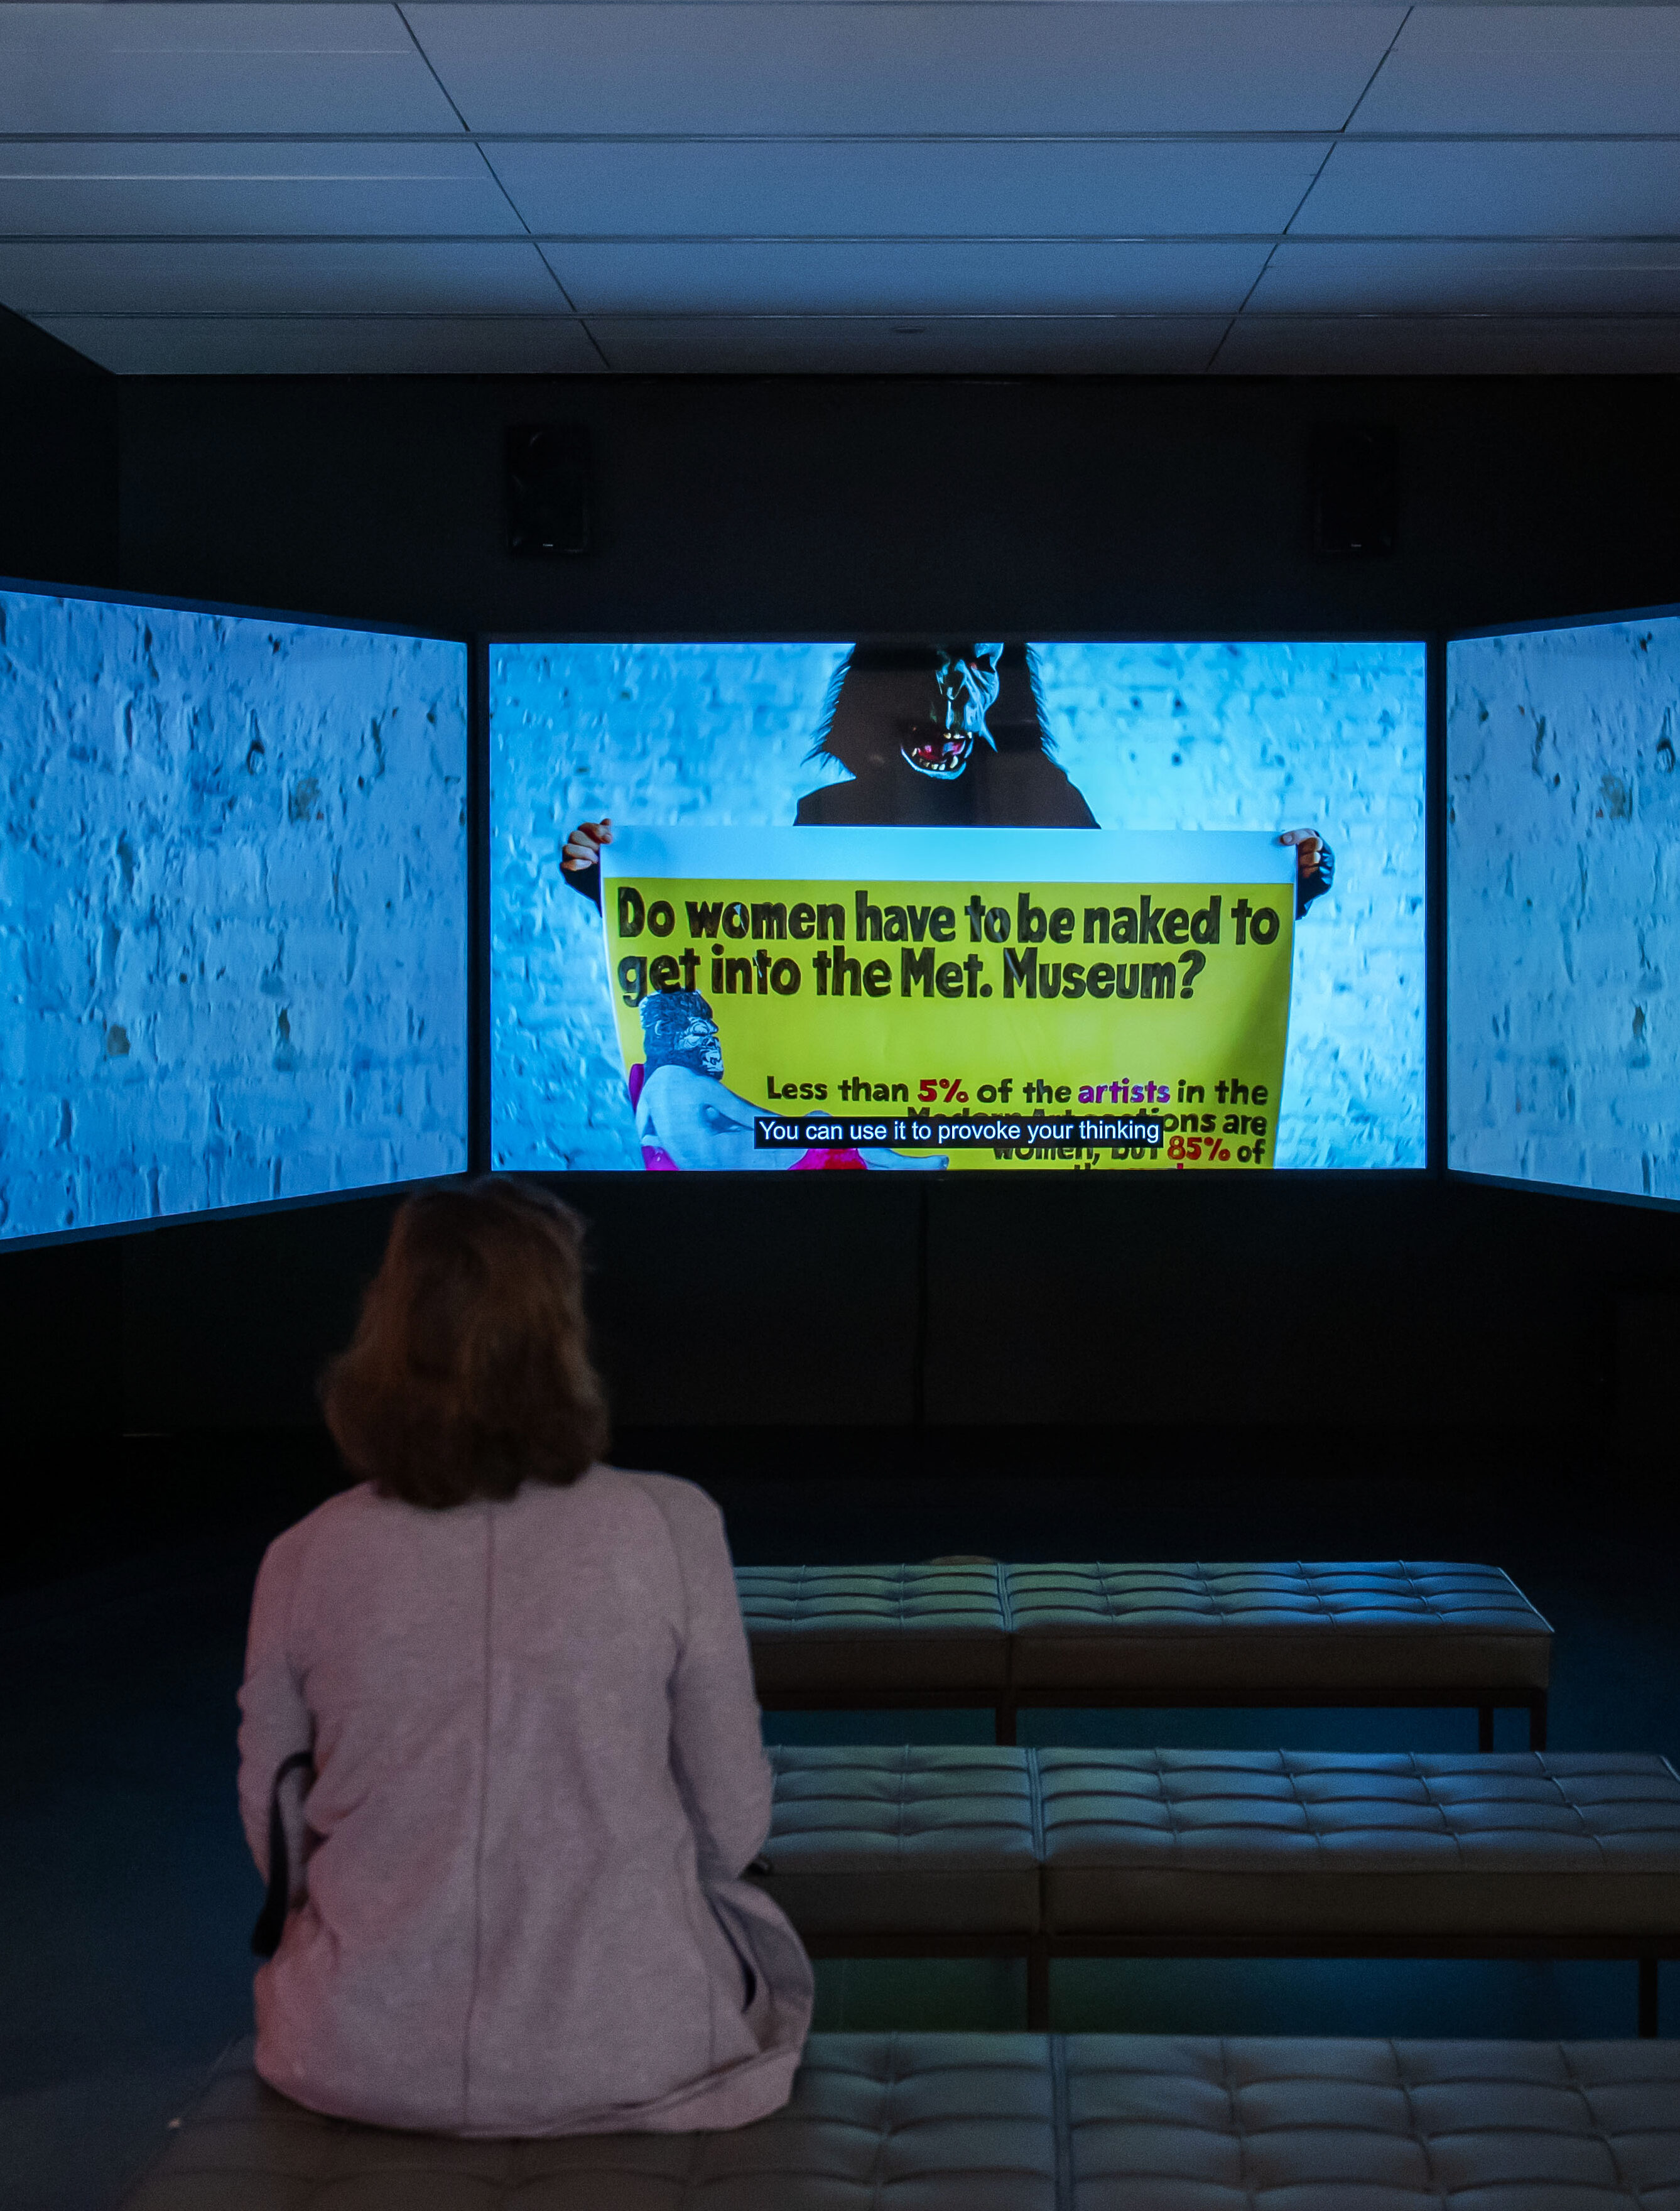 Two women are standing and sitting in a dark room in front of three large screens. A film is playing, showing a person in a gorilla costume holding up a banner. The banner says: 